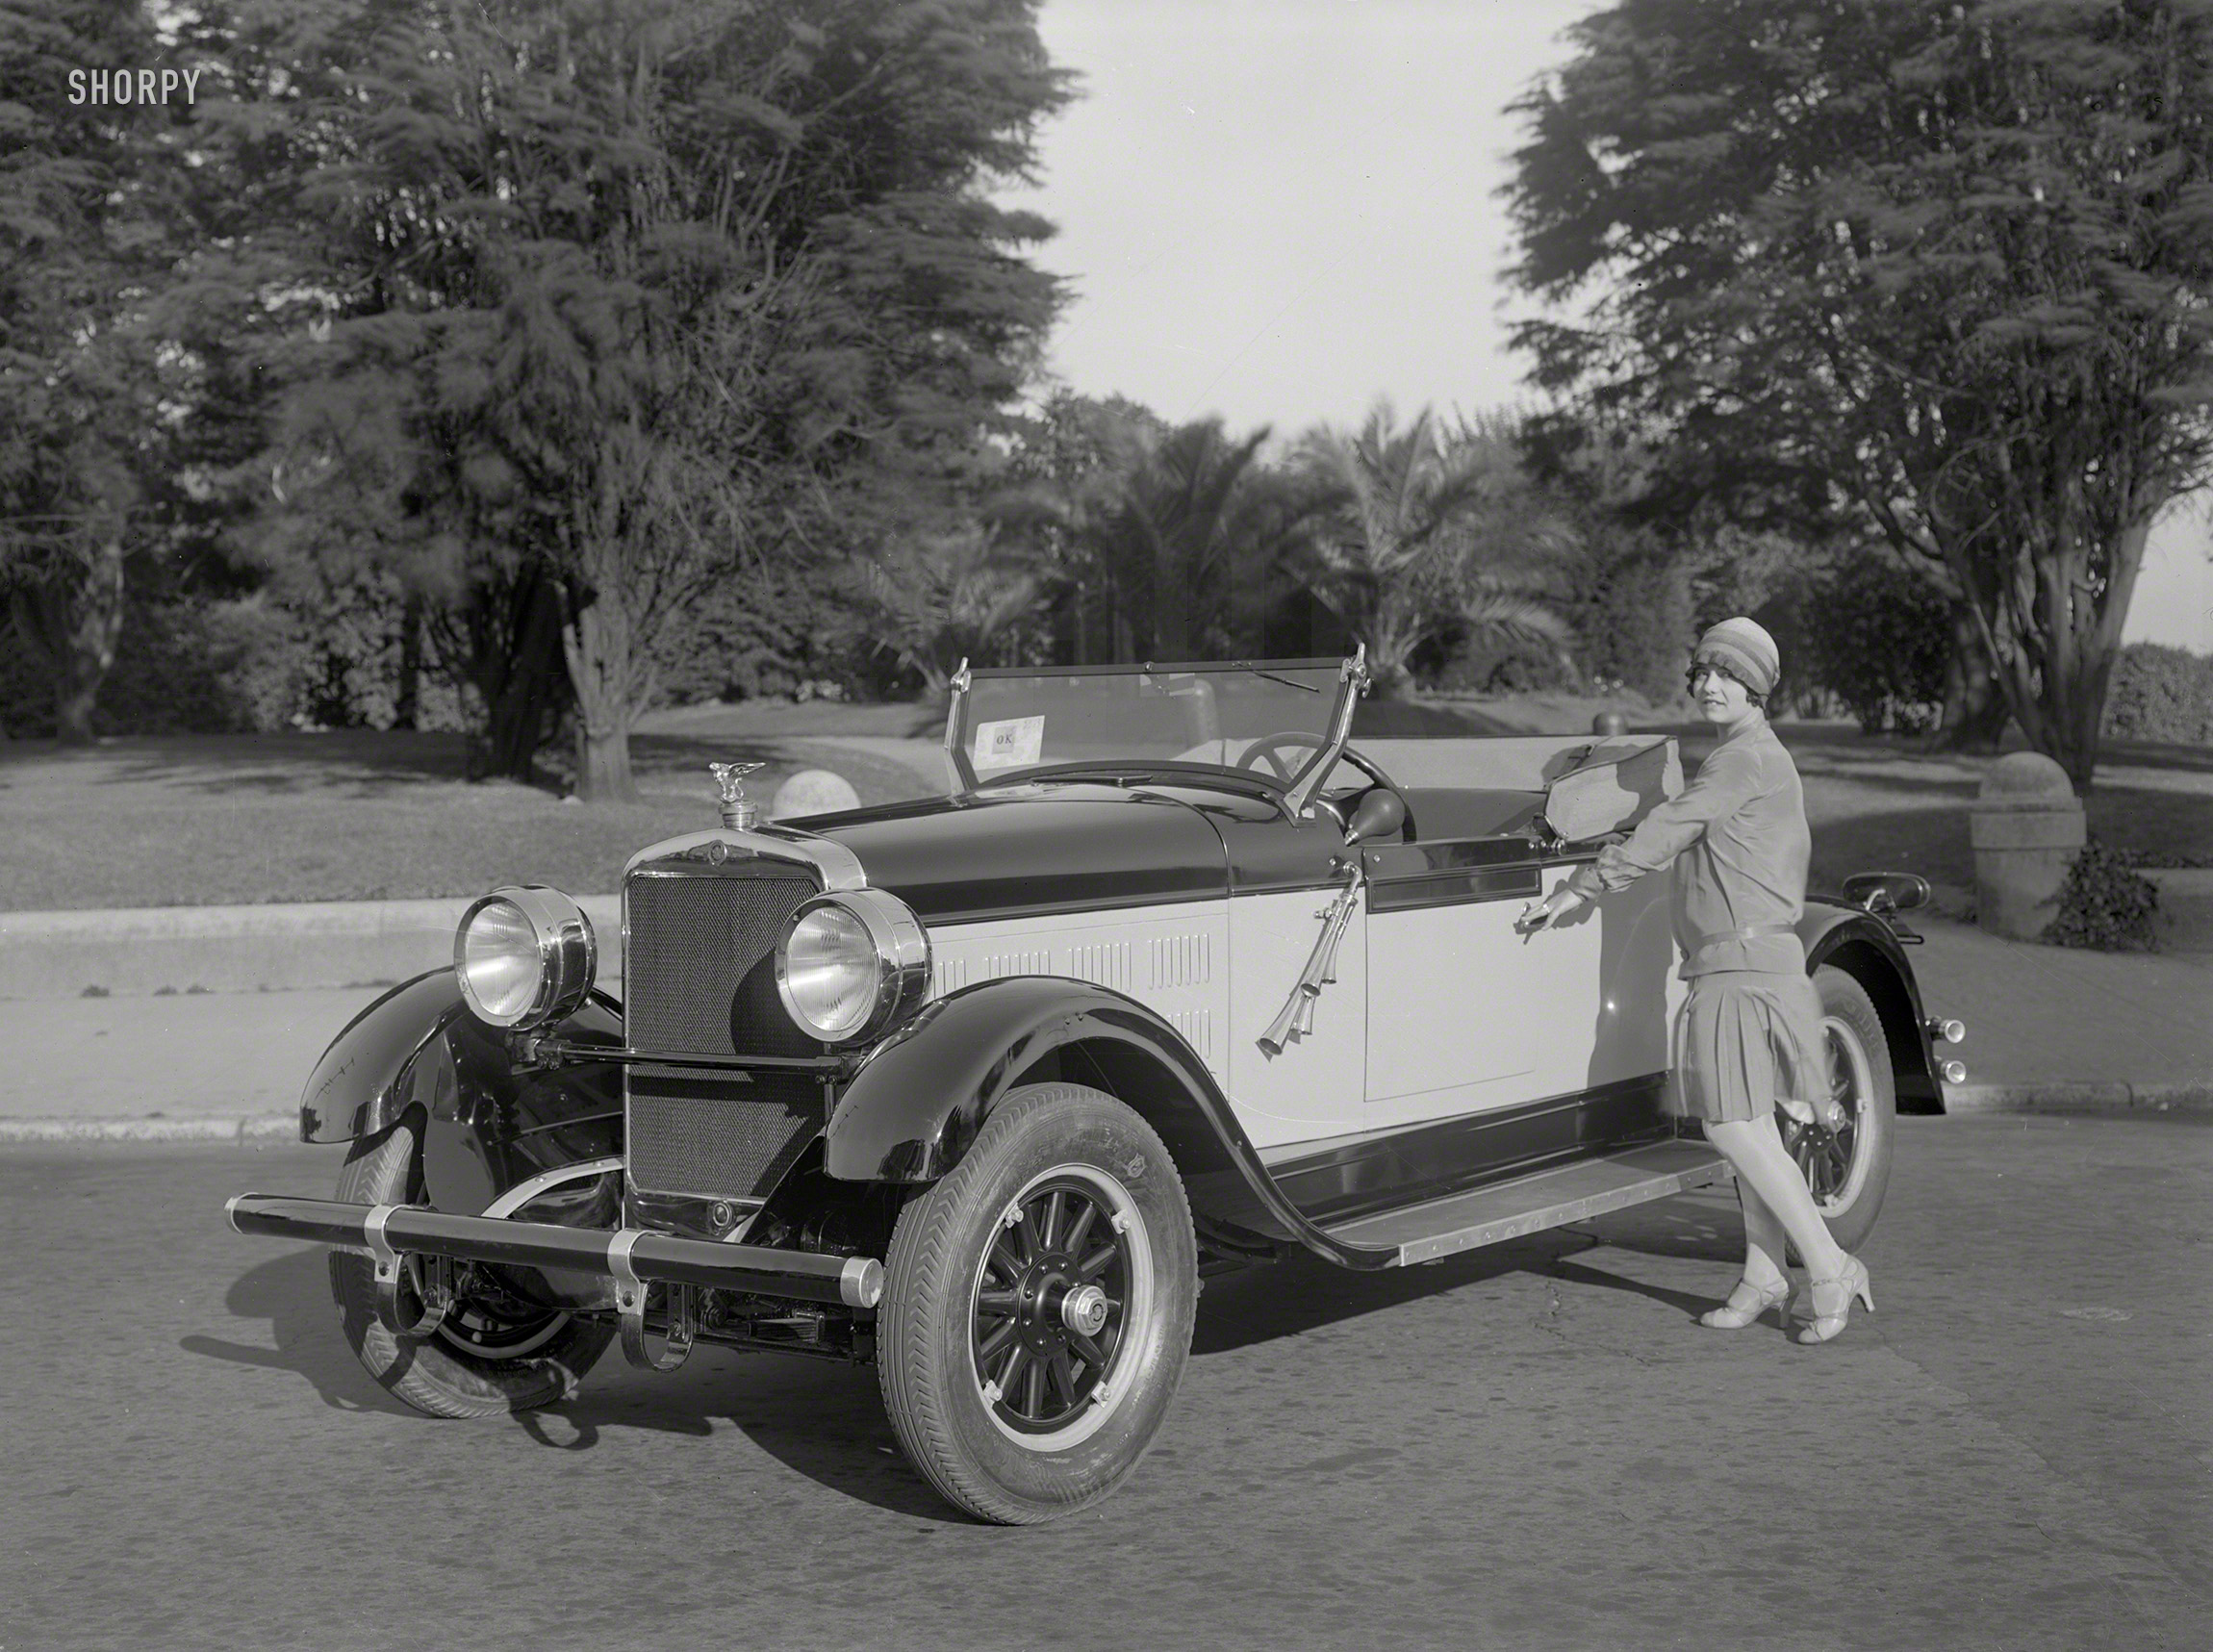 San Francisco, 1927. "Gardner roadster at Golden Gate Park." With all the right accessories. 5x7 glass negative by Christopher Helin. View full size.